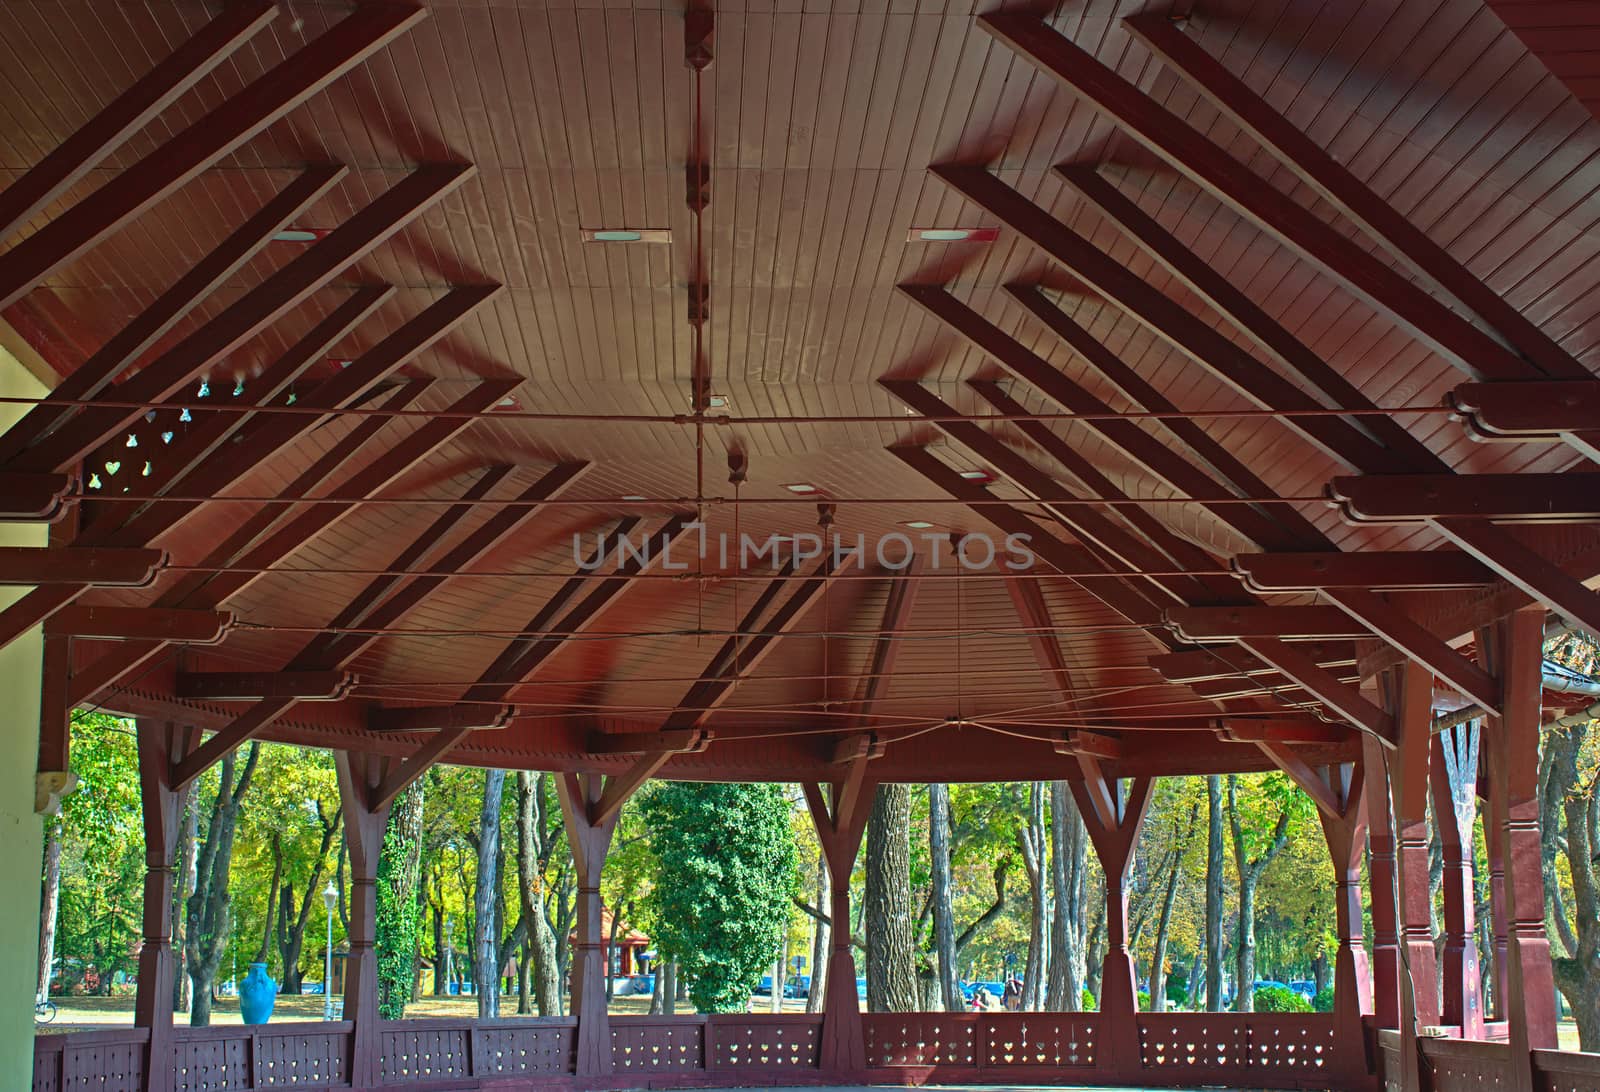 Big brown open wooden dome ceiling